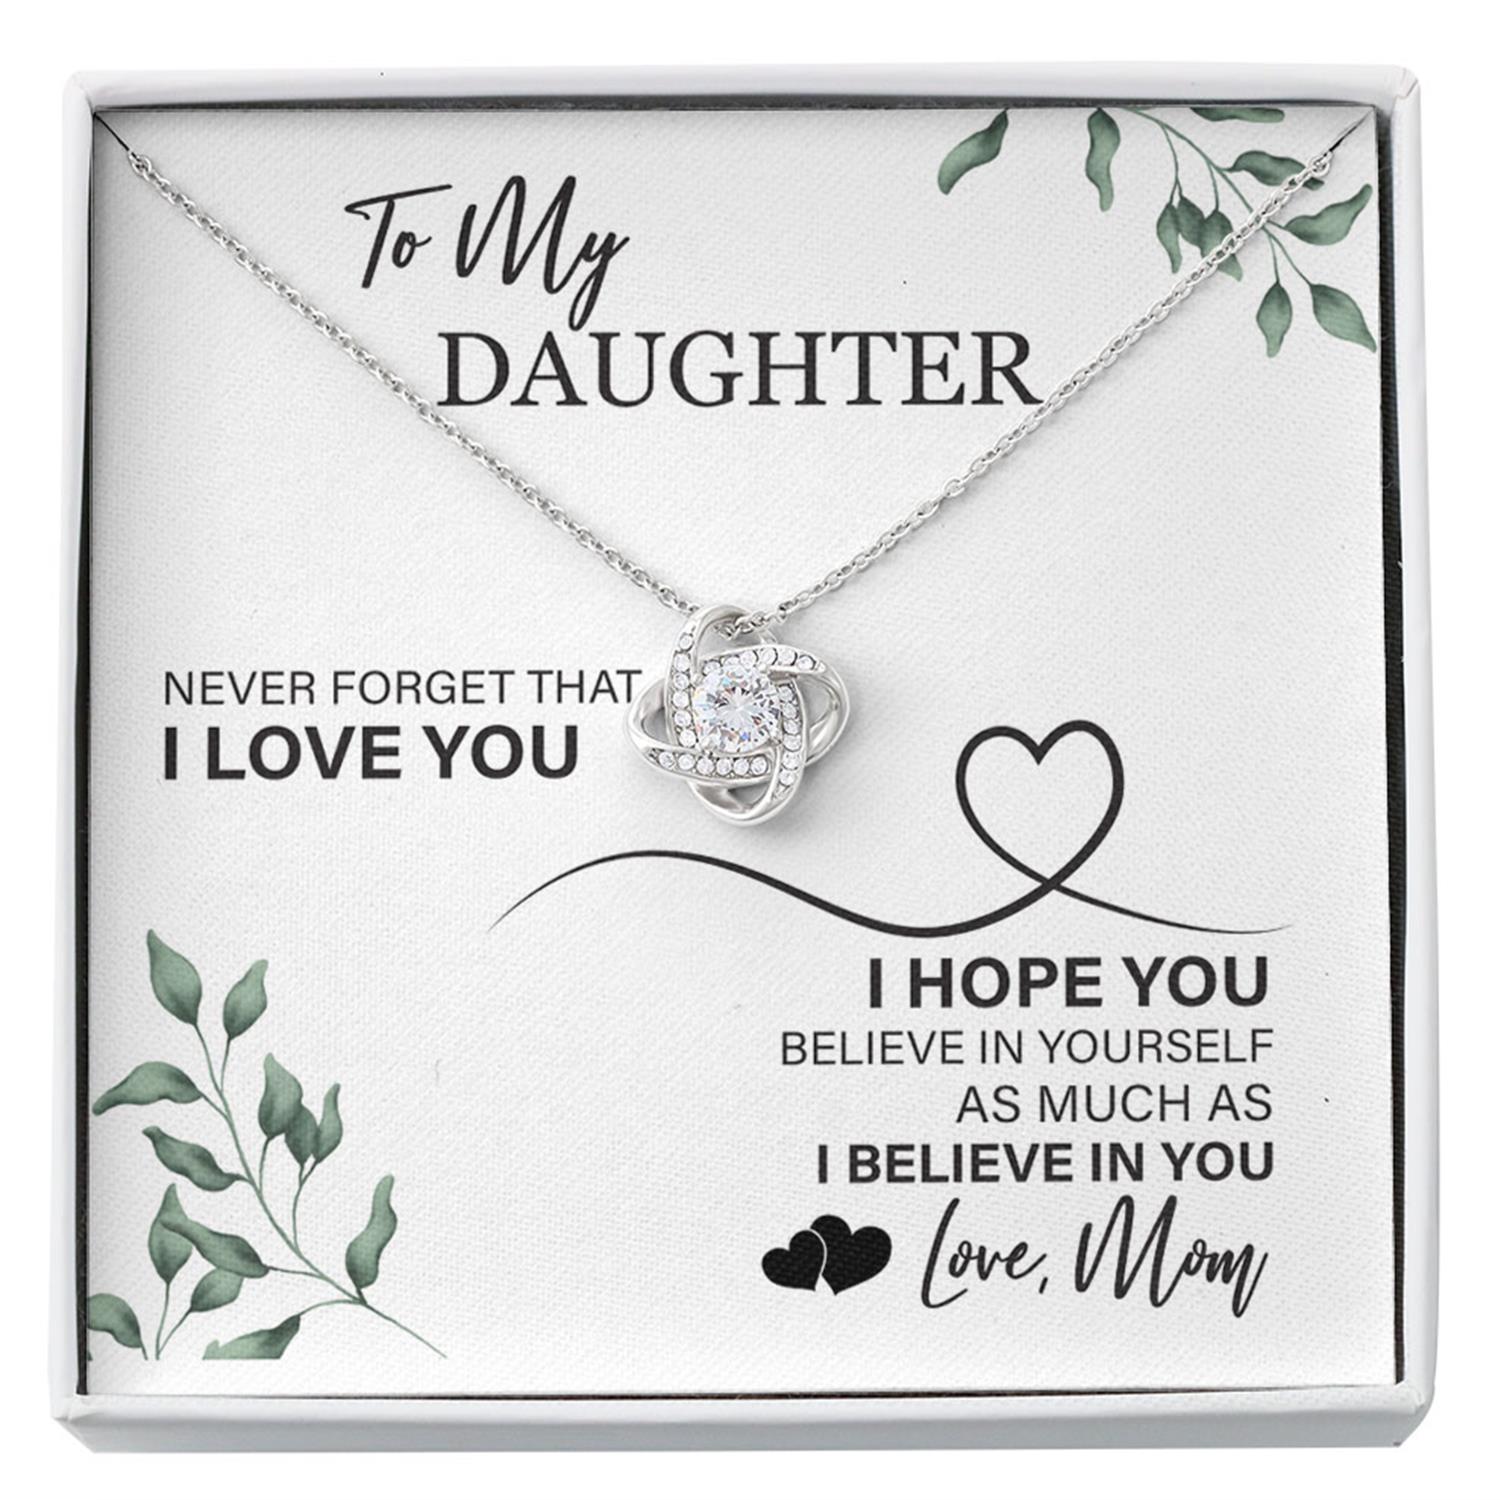 Daughter Necklace, Mom Necklace, Mother Daughter Necklace, Never Forget Love You Believe Yourself Much Custom Necklace